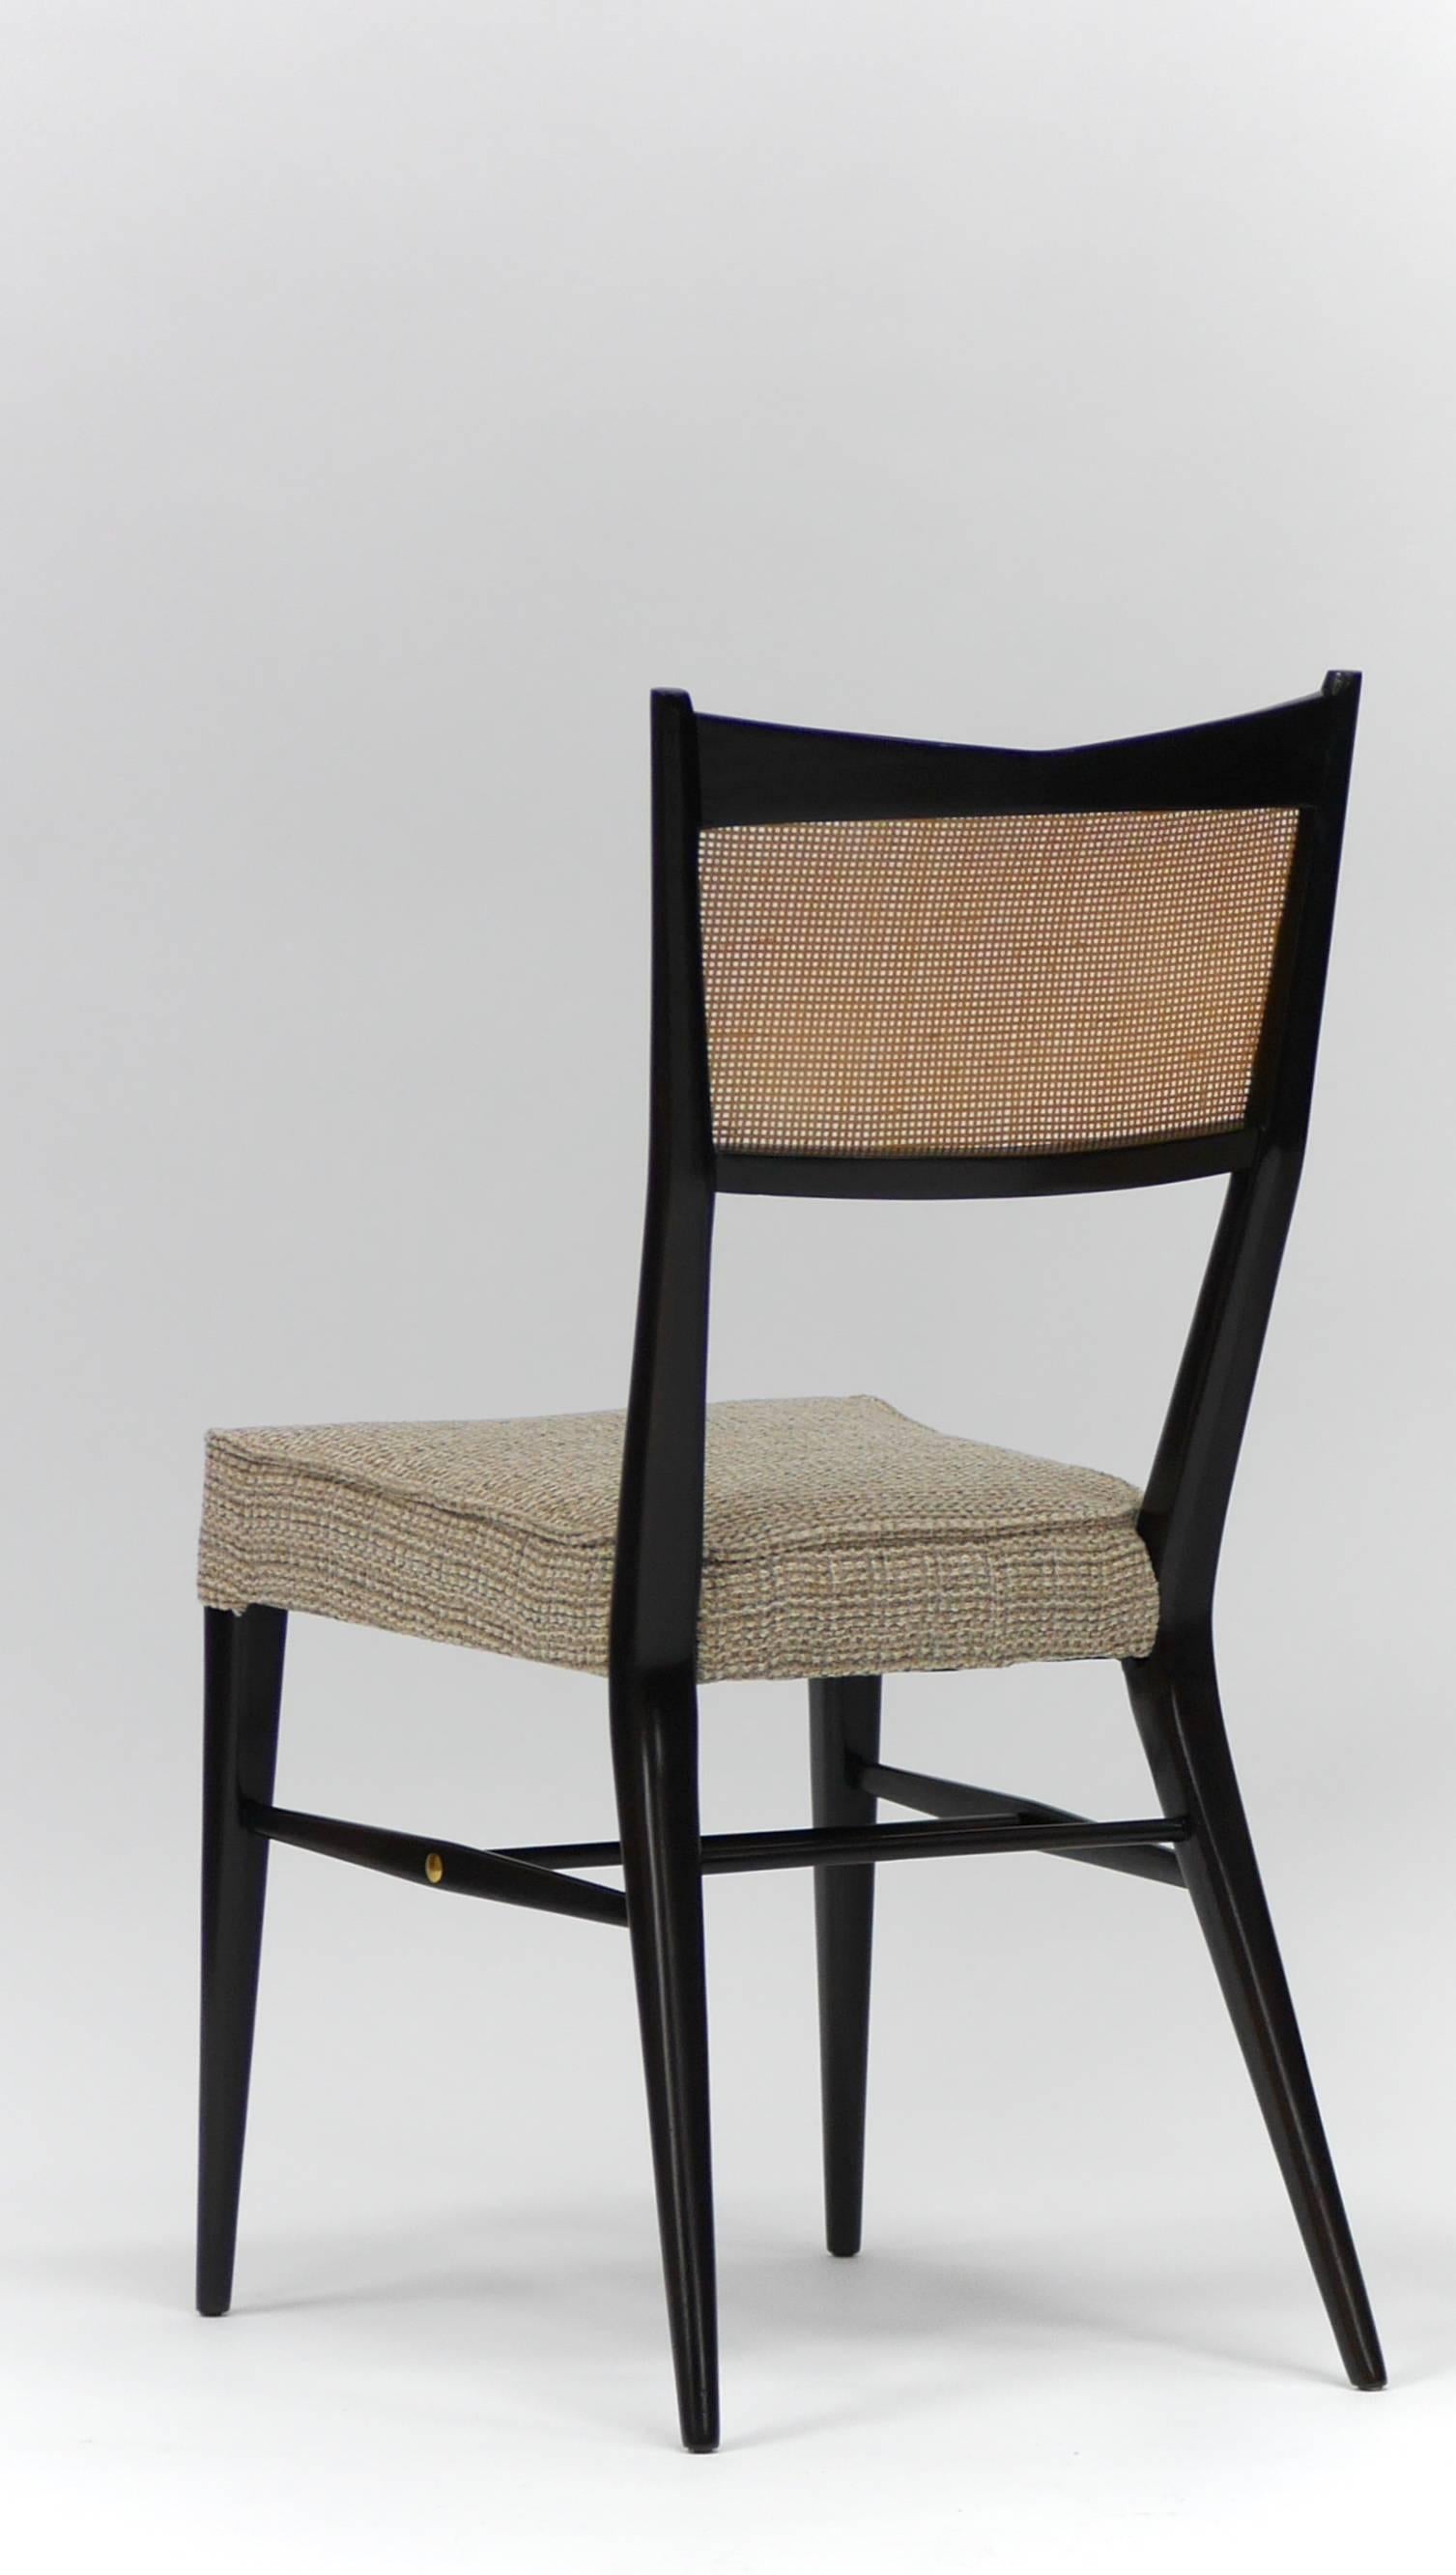 Set of eight Paul McCobb Irwin collection dining chairs with sculpted mahogany frames and caned backs. Six side chairs, two armchairs. Refinished and re caned. Upholstery shown is for reference only, chairs are stripped and are ready for client's